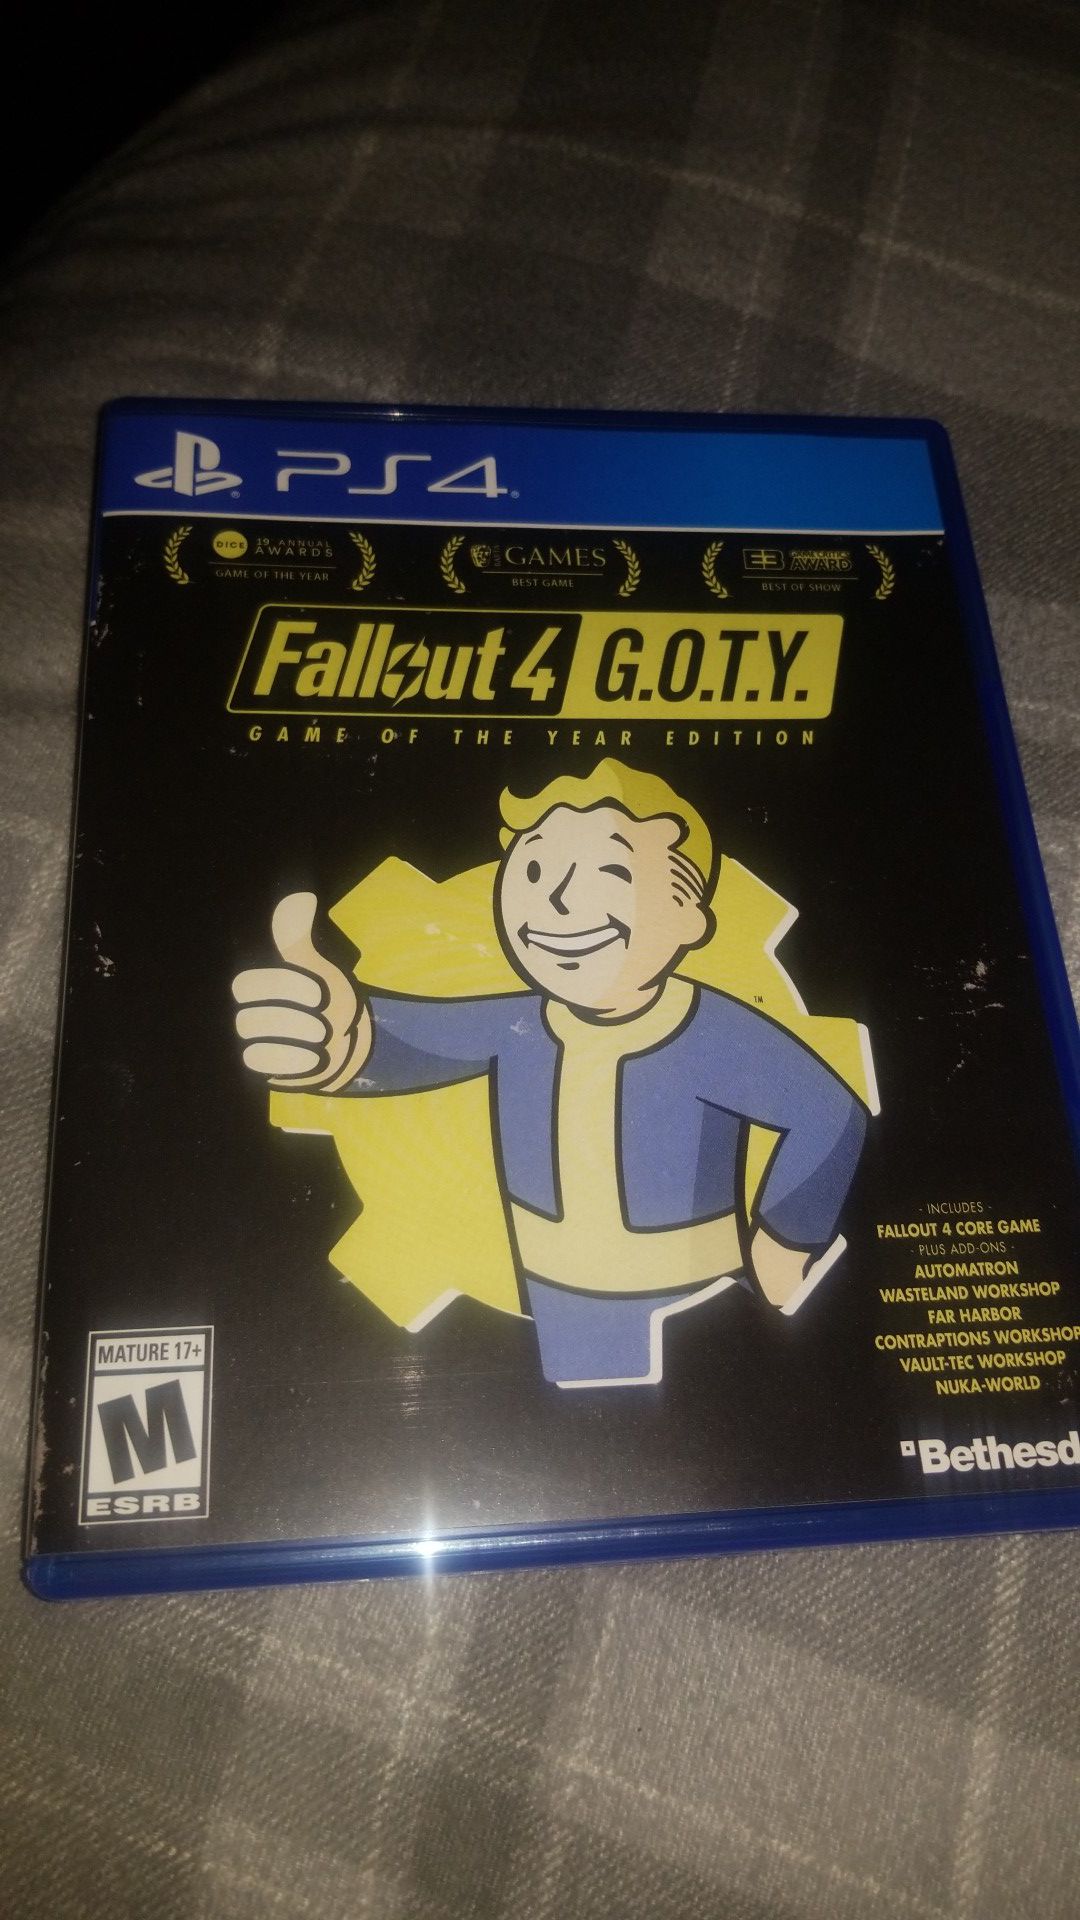 Fallout 4 GOTY edition